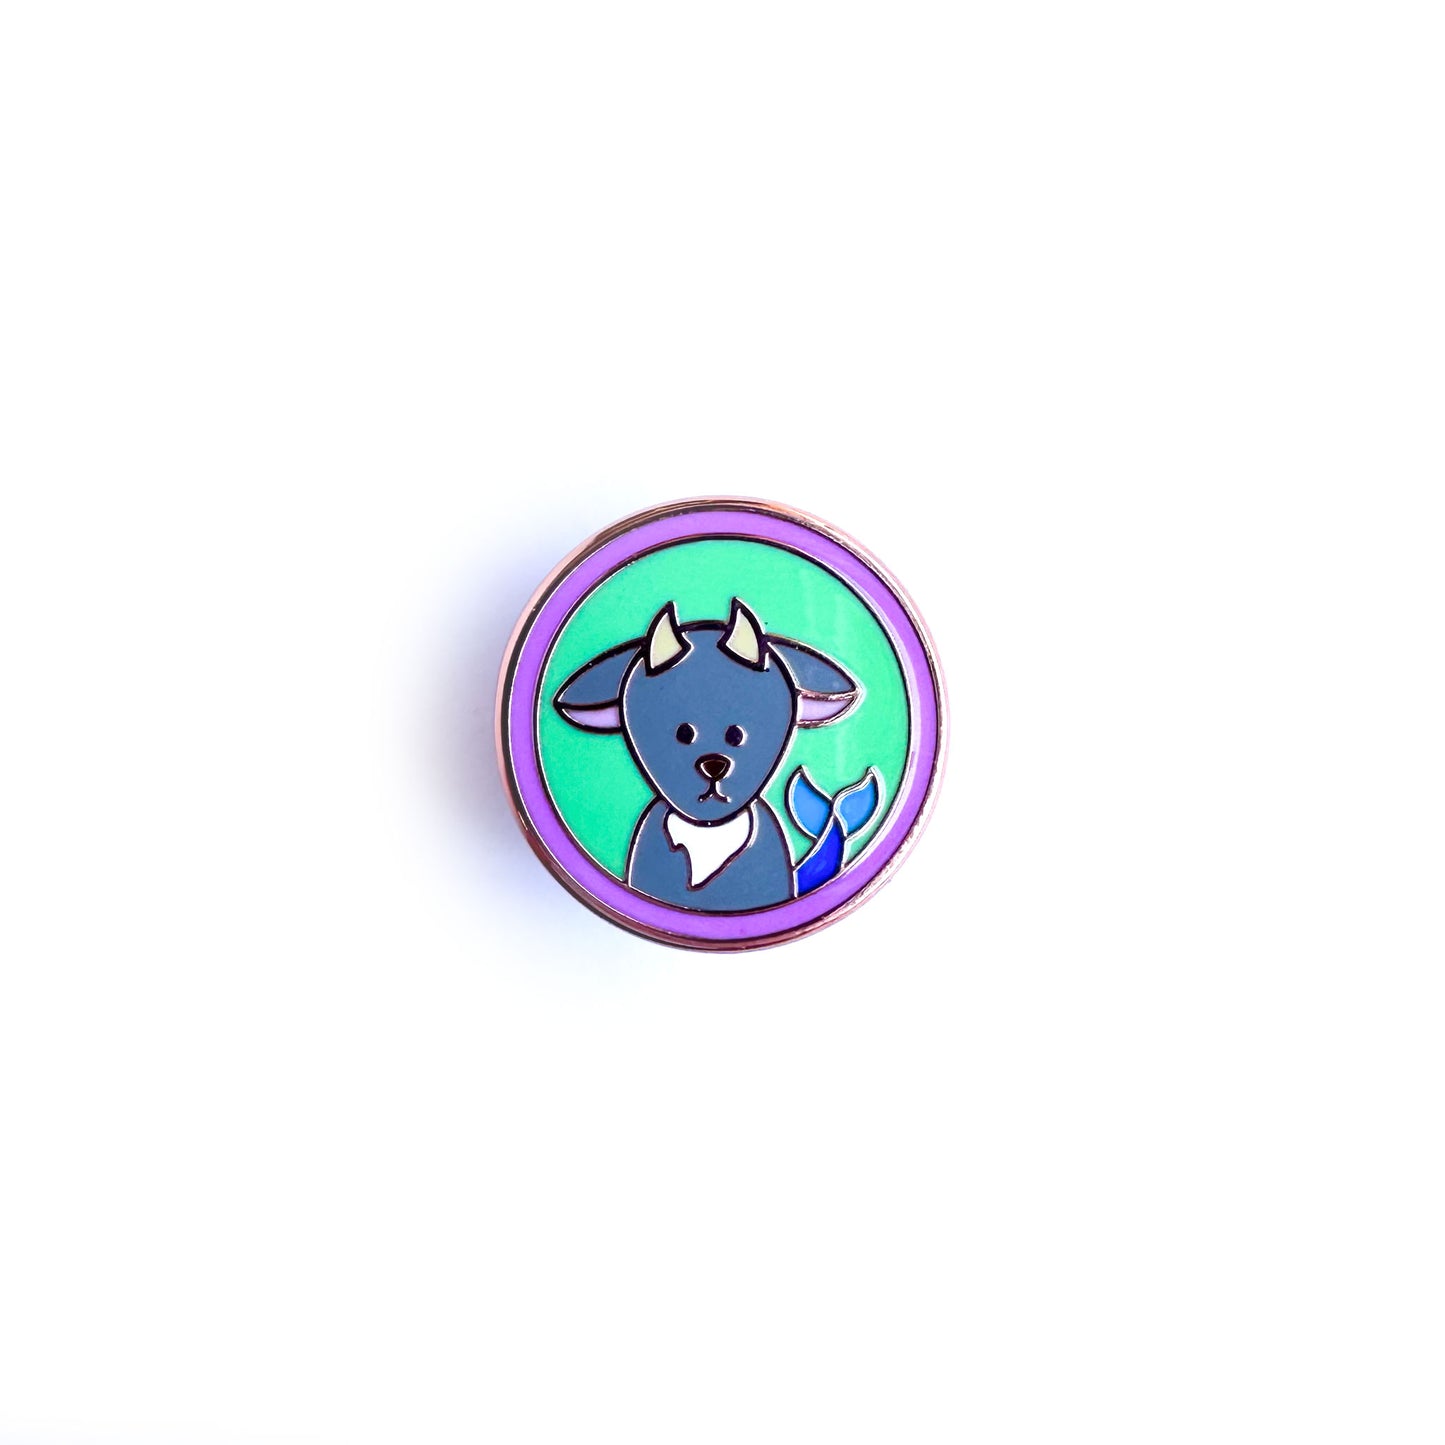 A circle enamel pin with a cute illustration of a sea goat to represent Capricorn as a zodiac sign. 